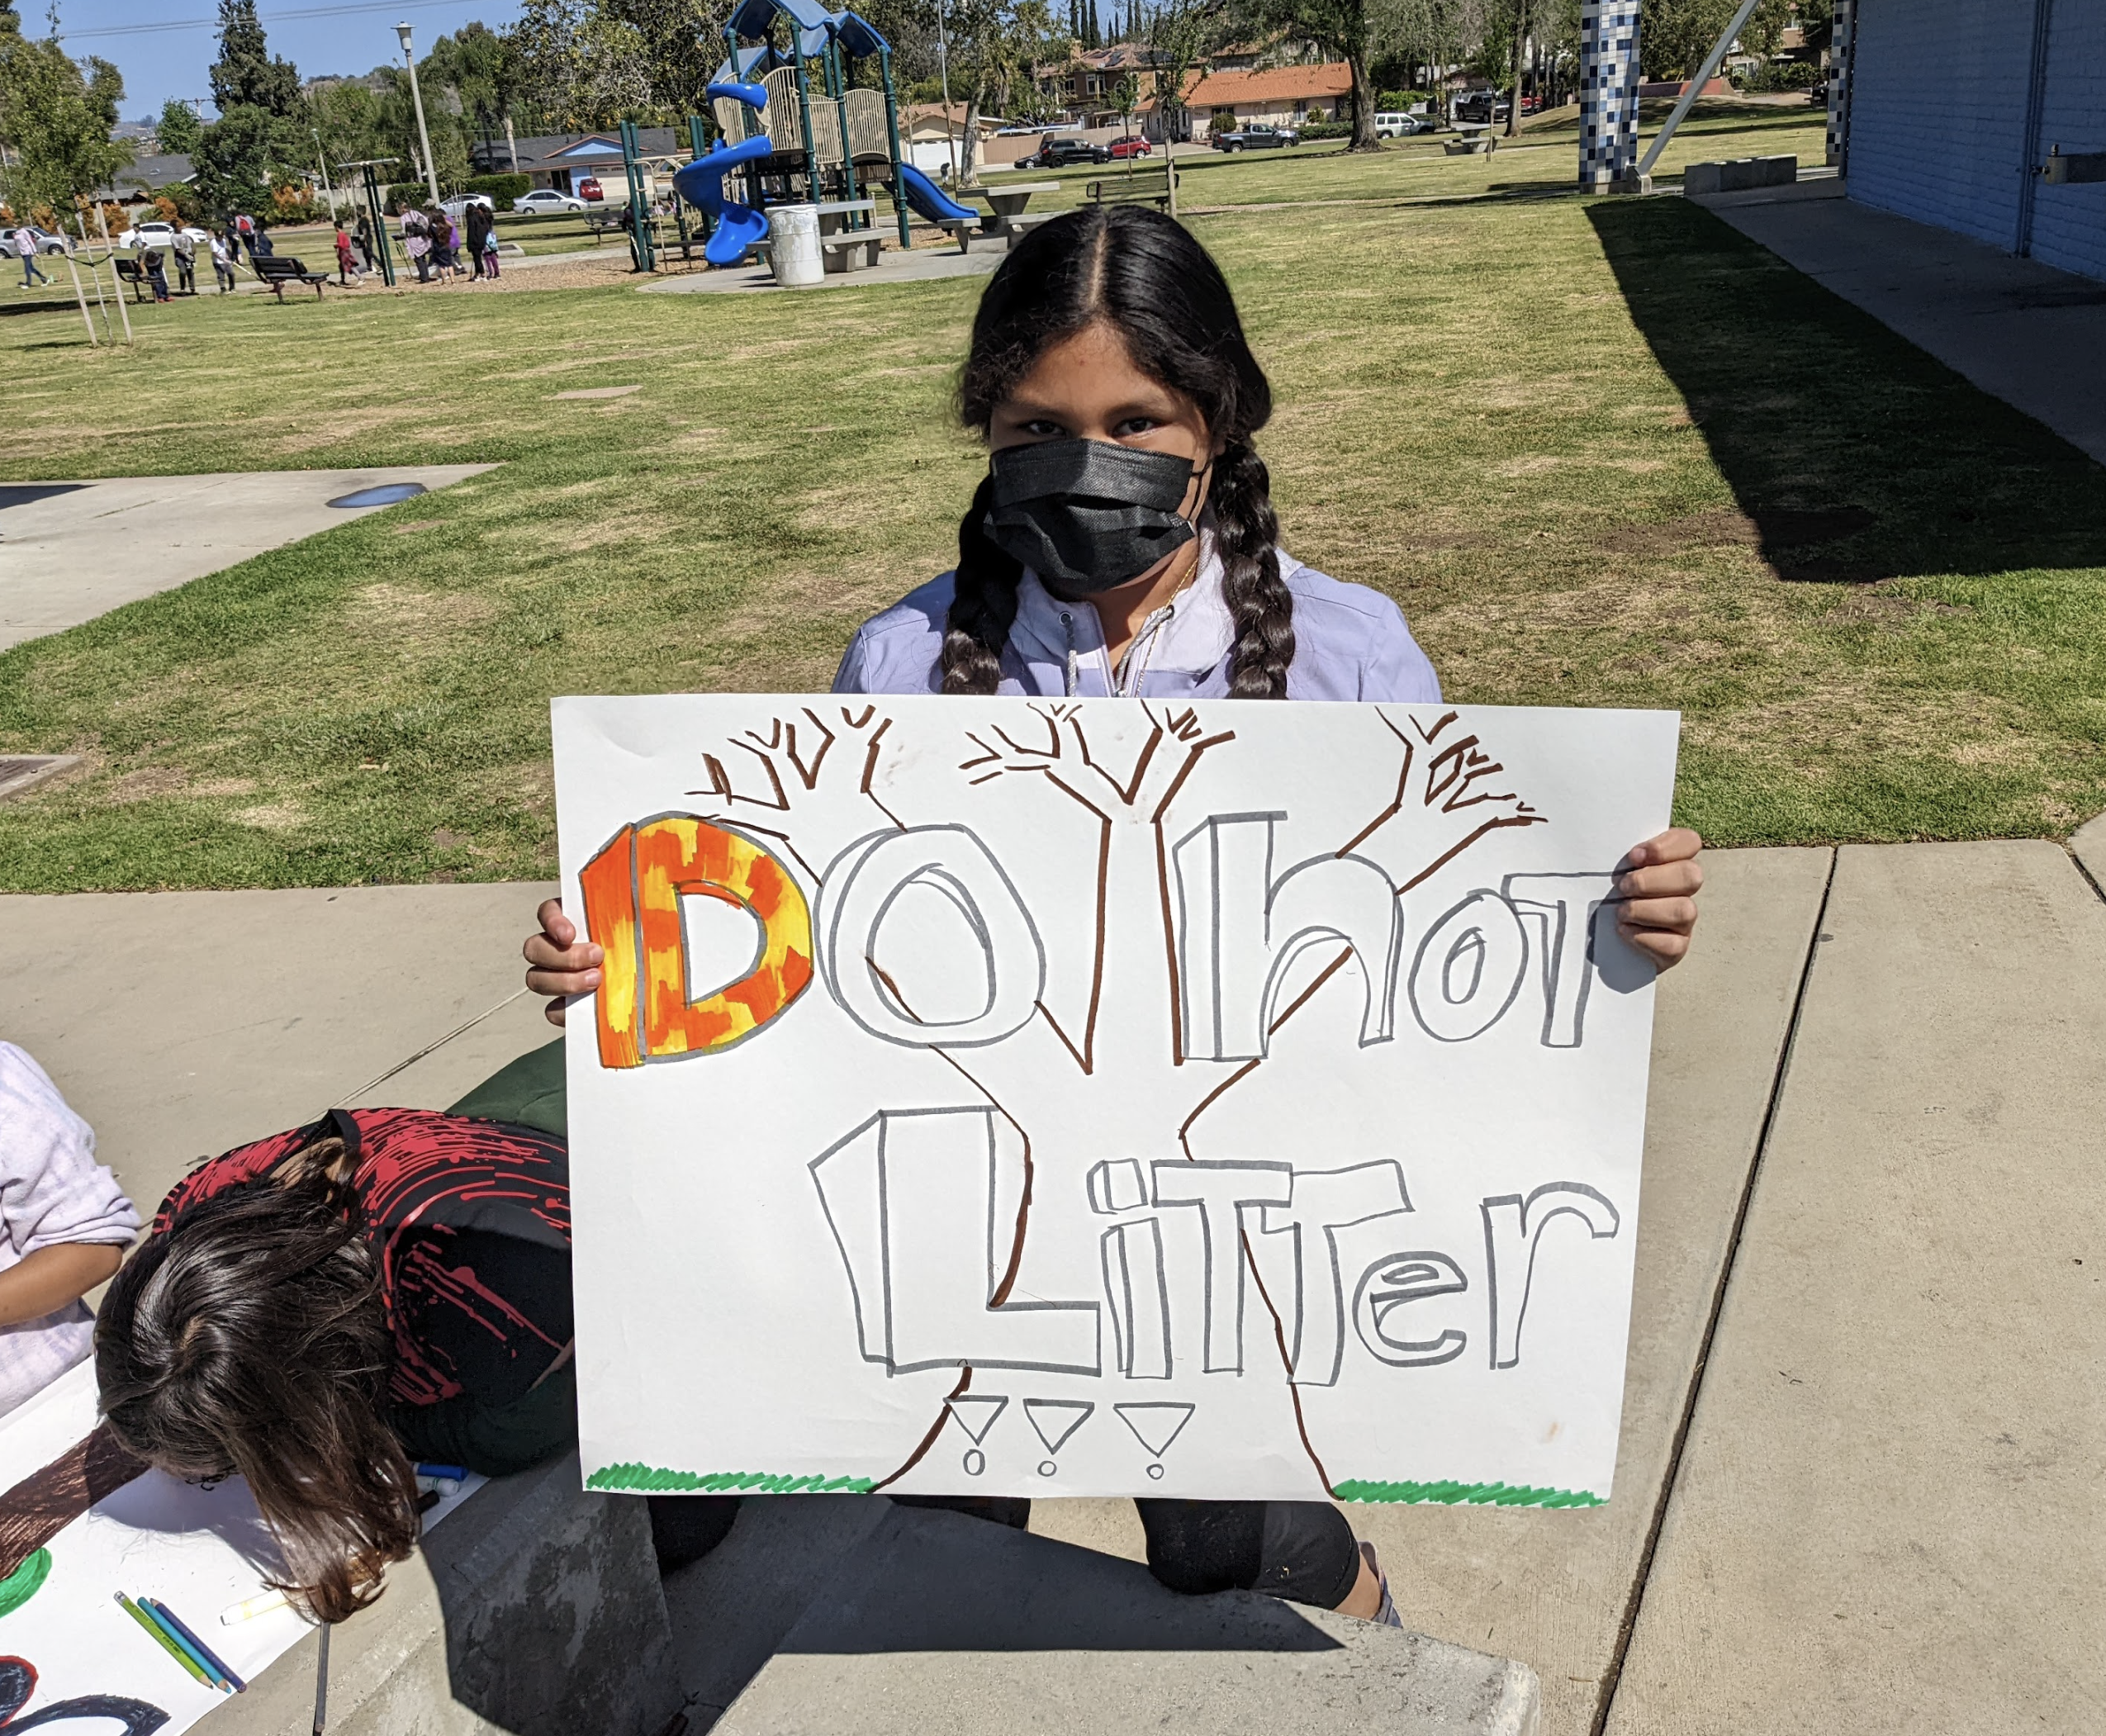 An elementary student holds up a sign decrying litter in a local park.